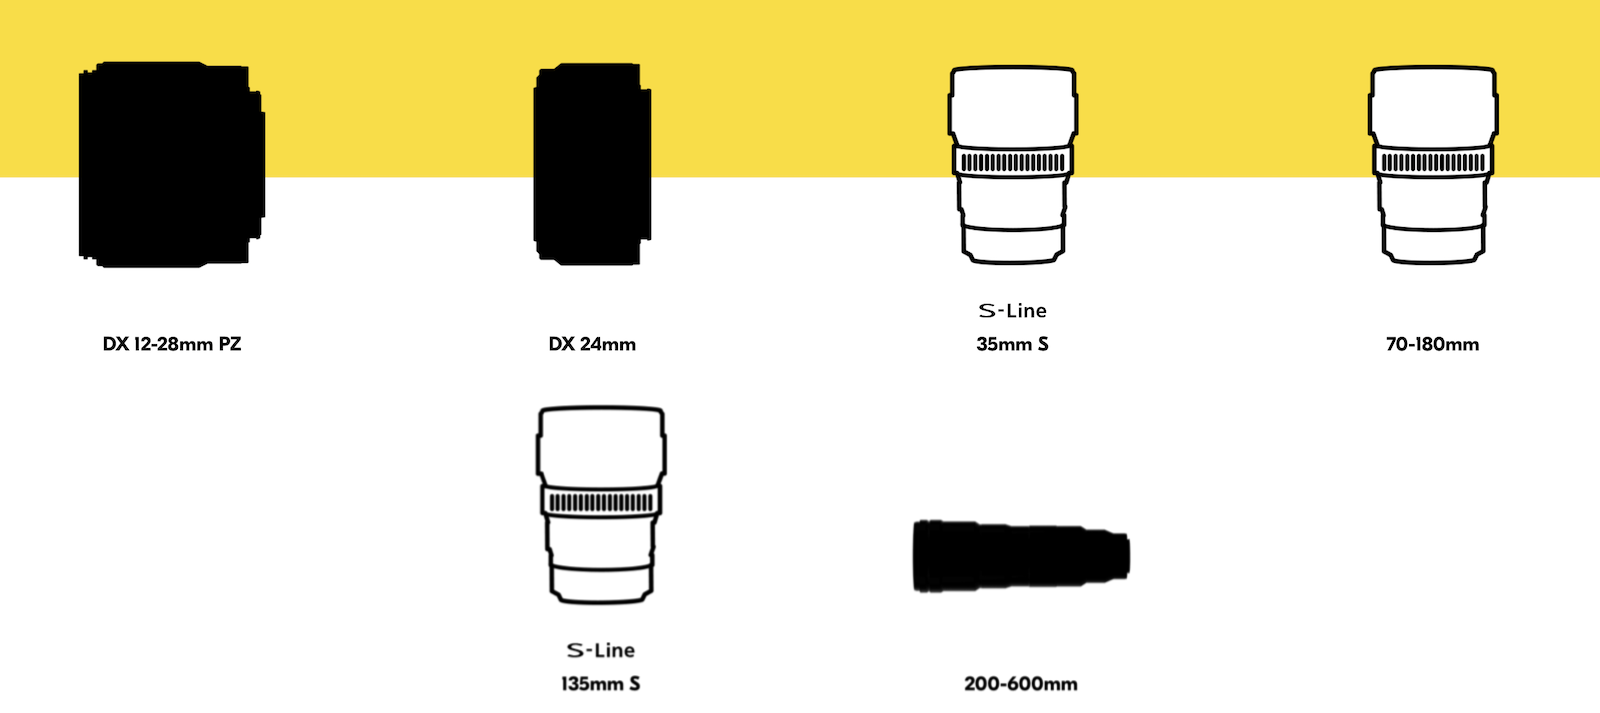 here-is-the-latest-nikon-z-lens-roadmap-version-5-3-as-of-january-2023